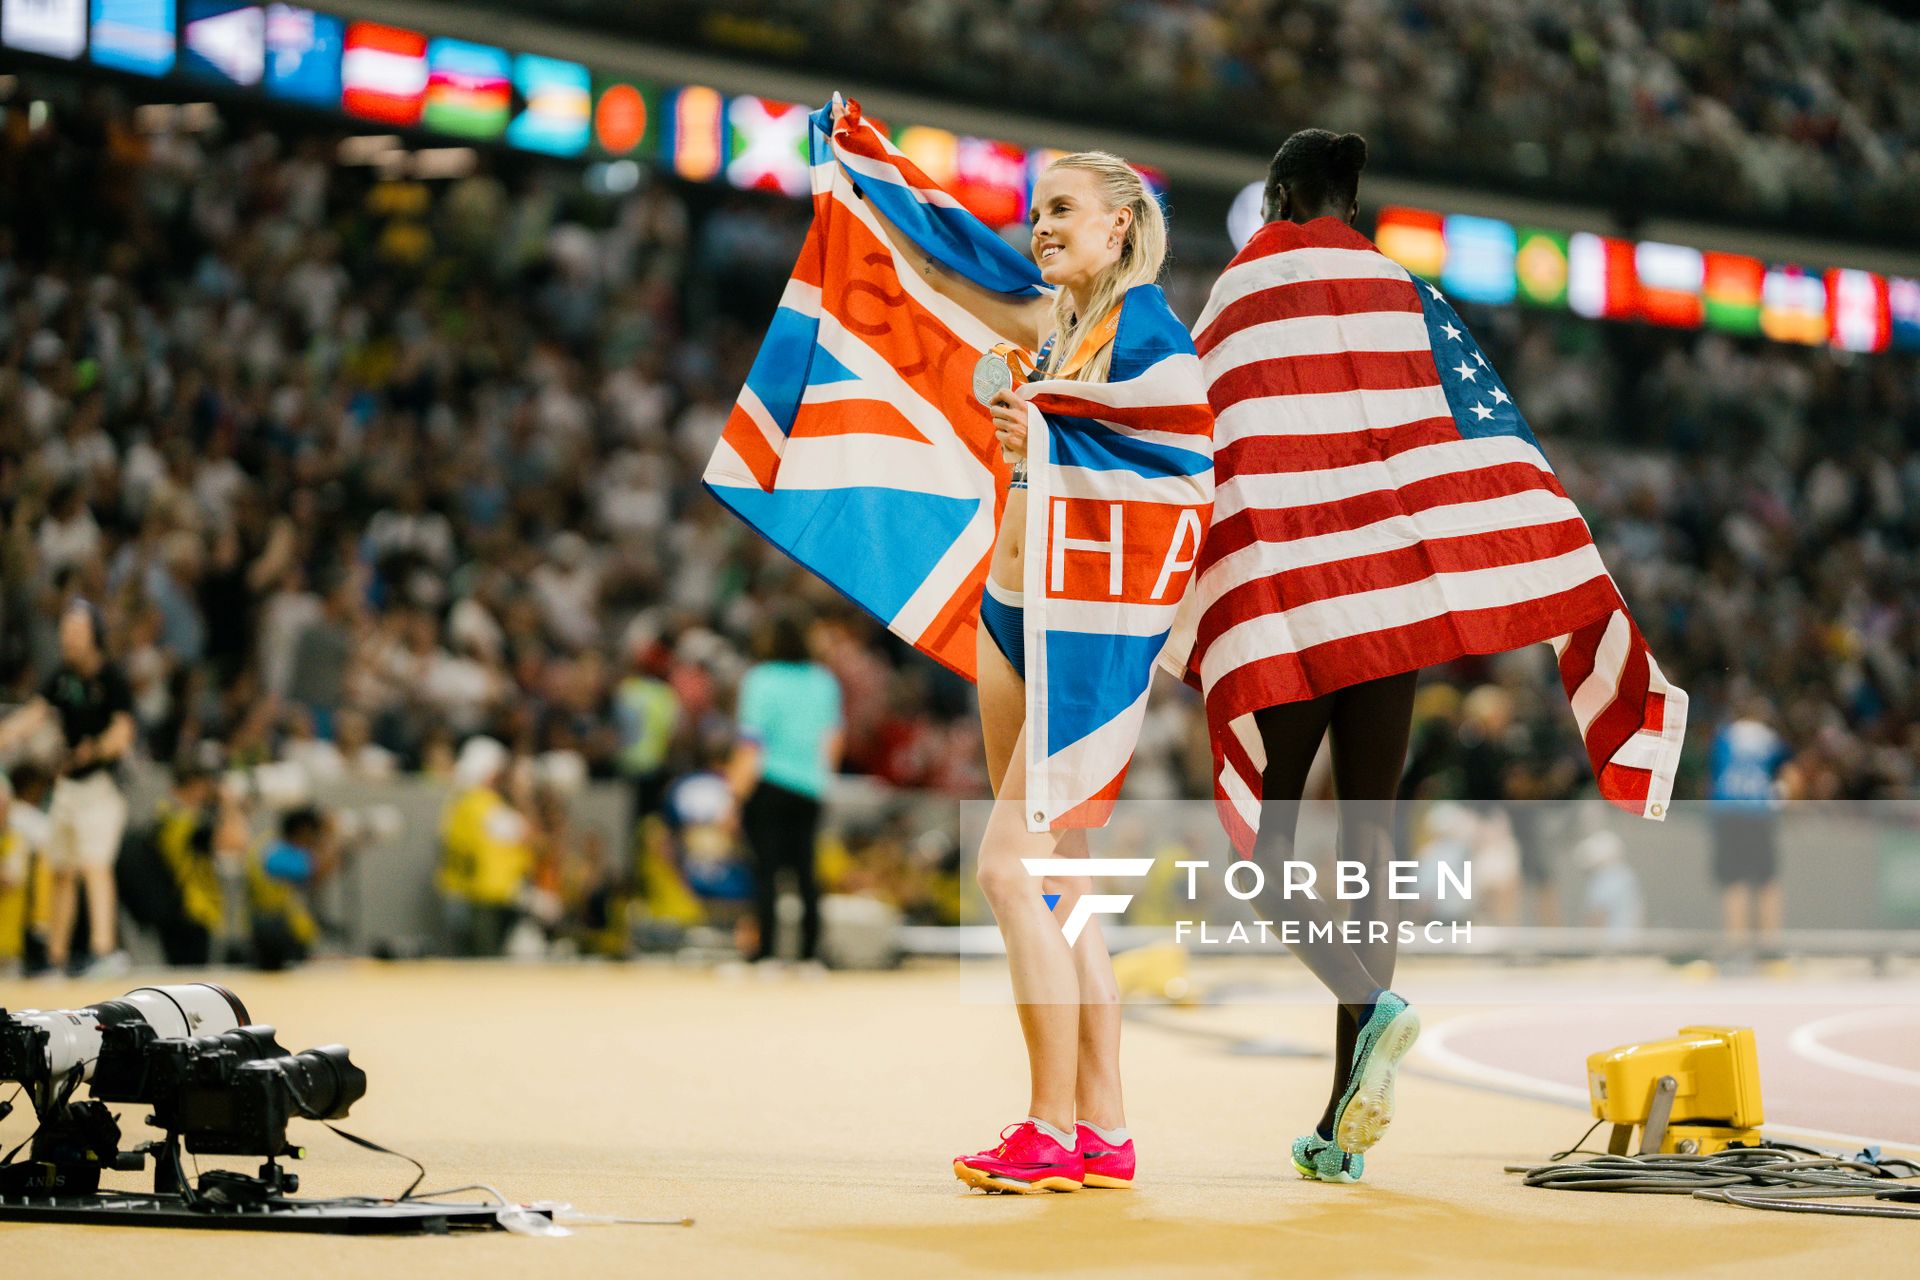 Keely Hodgkinson (GBR/Great Britain & N.I.) during the 800 Metres on Day 9 of the World Athletics Championships Budapest 23 at the National Athletics Centre in Budapest, Hungary on August 27, 2023.